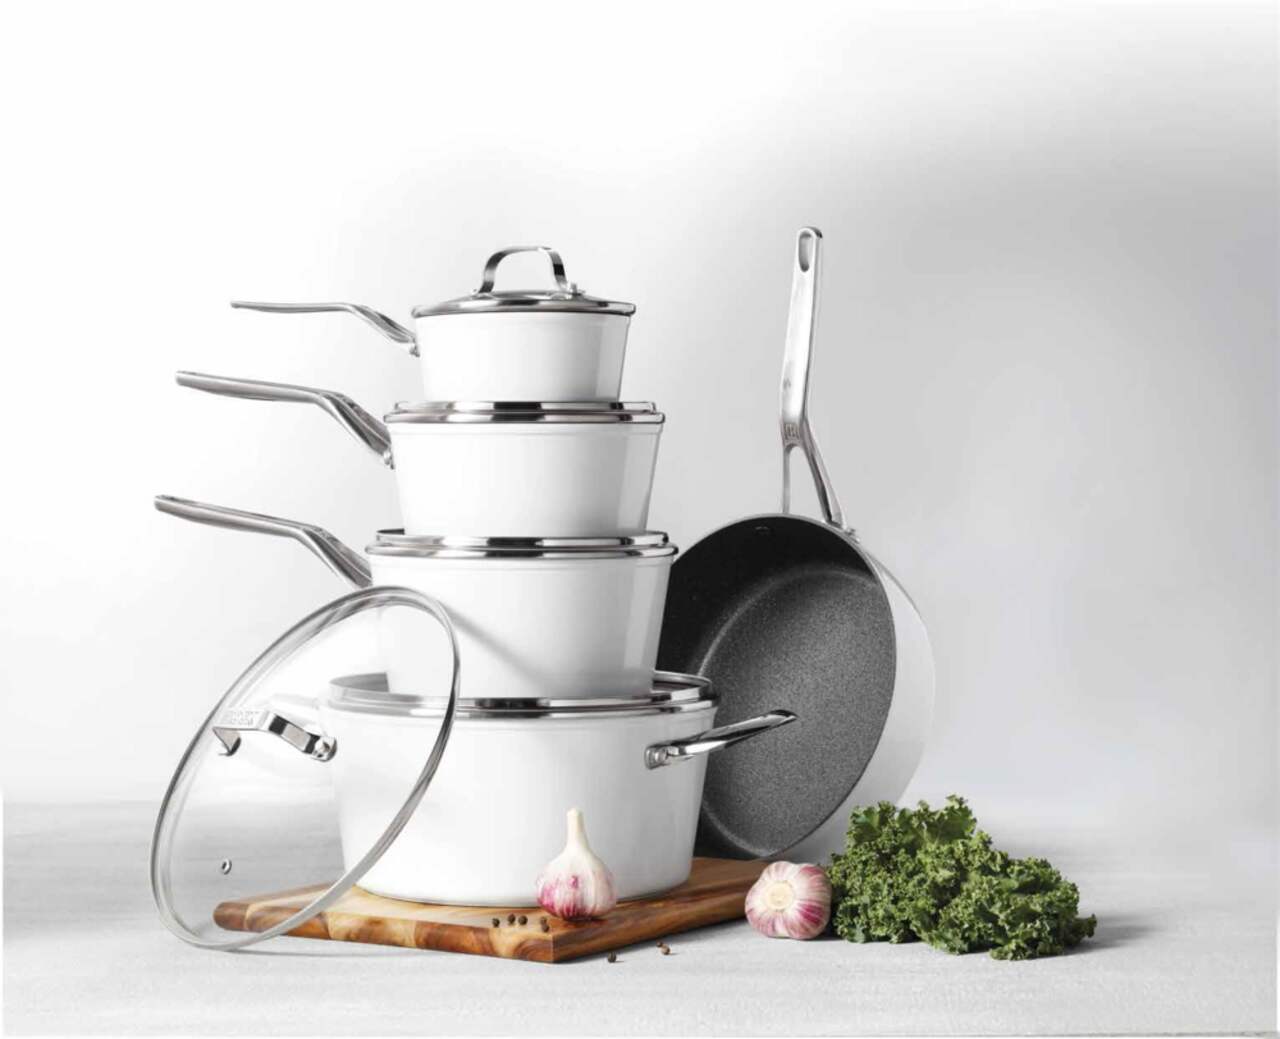 https://media-www.canadiantire.ca/product/living/kitchen/cookware/1429100/heritage-the-rock-ceramic-zero-10-piece-cookset-6929f0c6-5d76-47b9-8f80-eb58c930ad42.png?imdensity=1&imwidth=1244&impolicy=mZoom